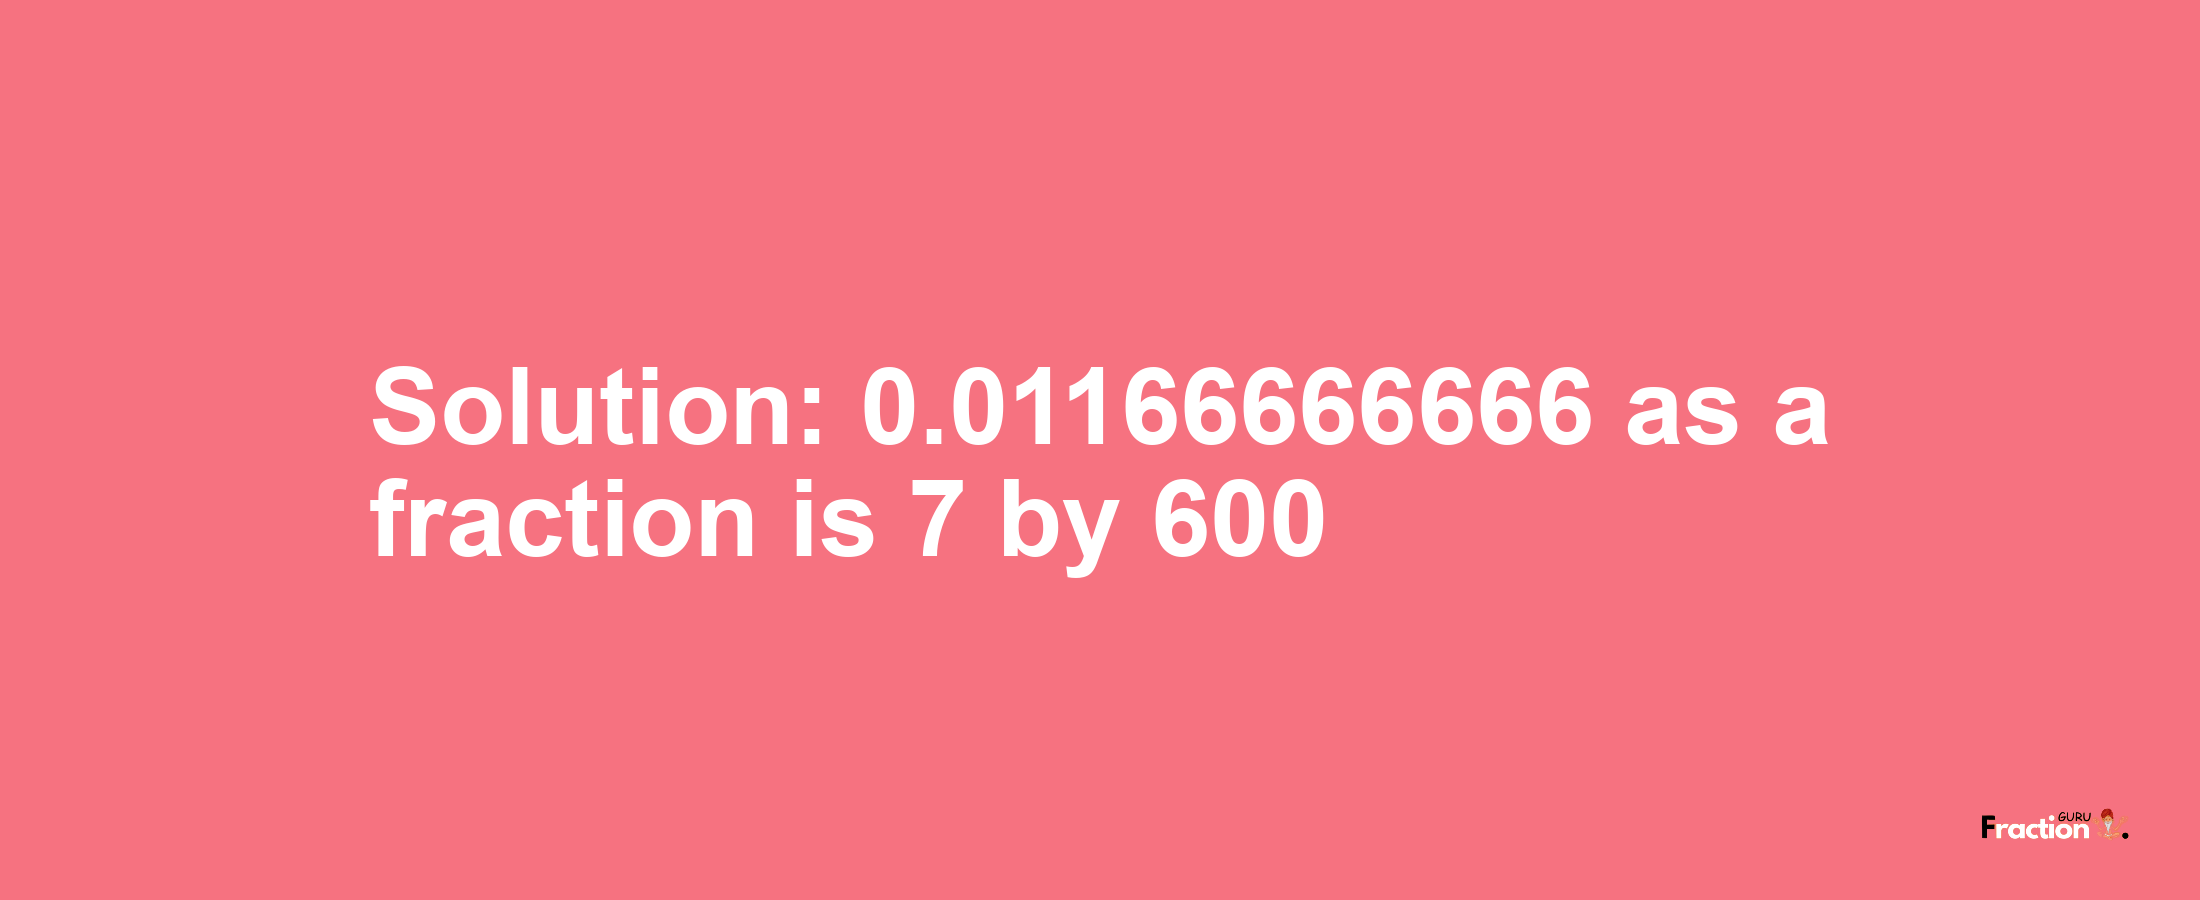 Solution:0.01166666666 as a fraction is 7/600